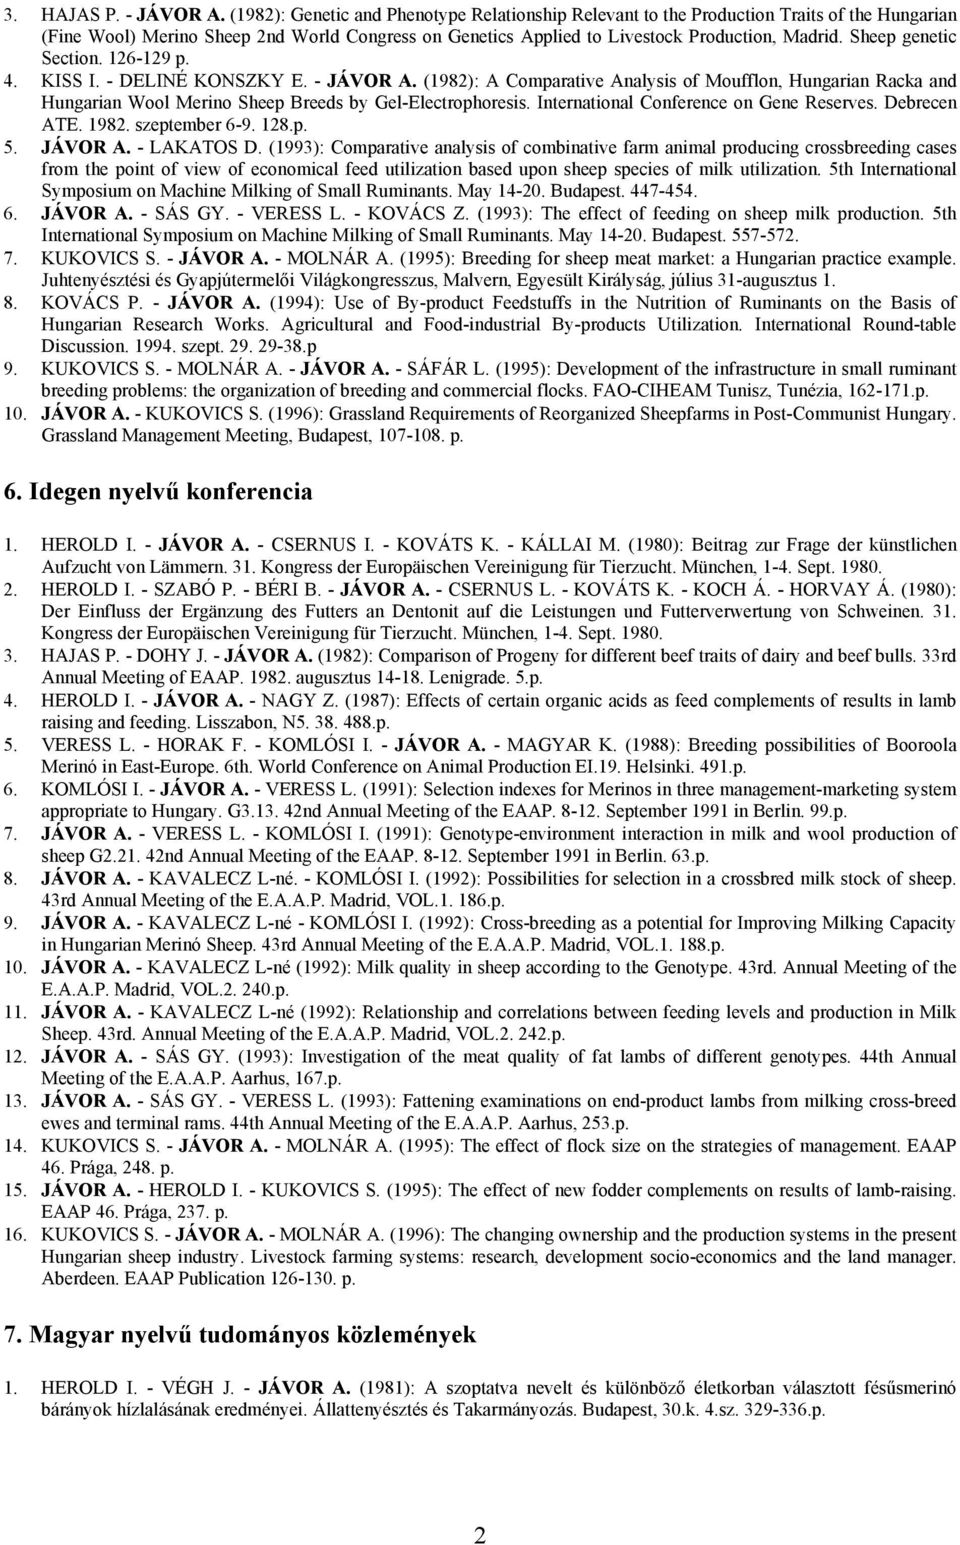 Sheep genetic Section. 126-129 p. 4. KISS I. - DELINÉ KONSZKY E. - JÁVOR A. (1982): A Comparative Analysis of Moufflon, Hungarian Racka and Hungarian Wool Merino Sheep Breeds by Gel-Electrophoresis.